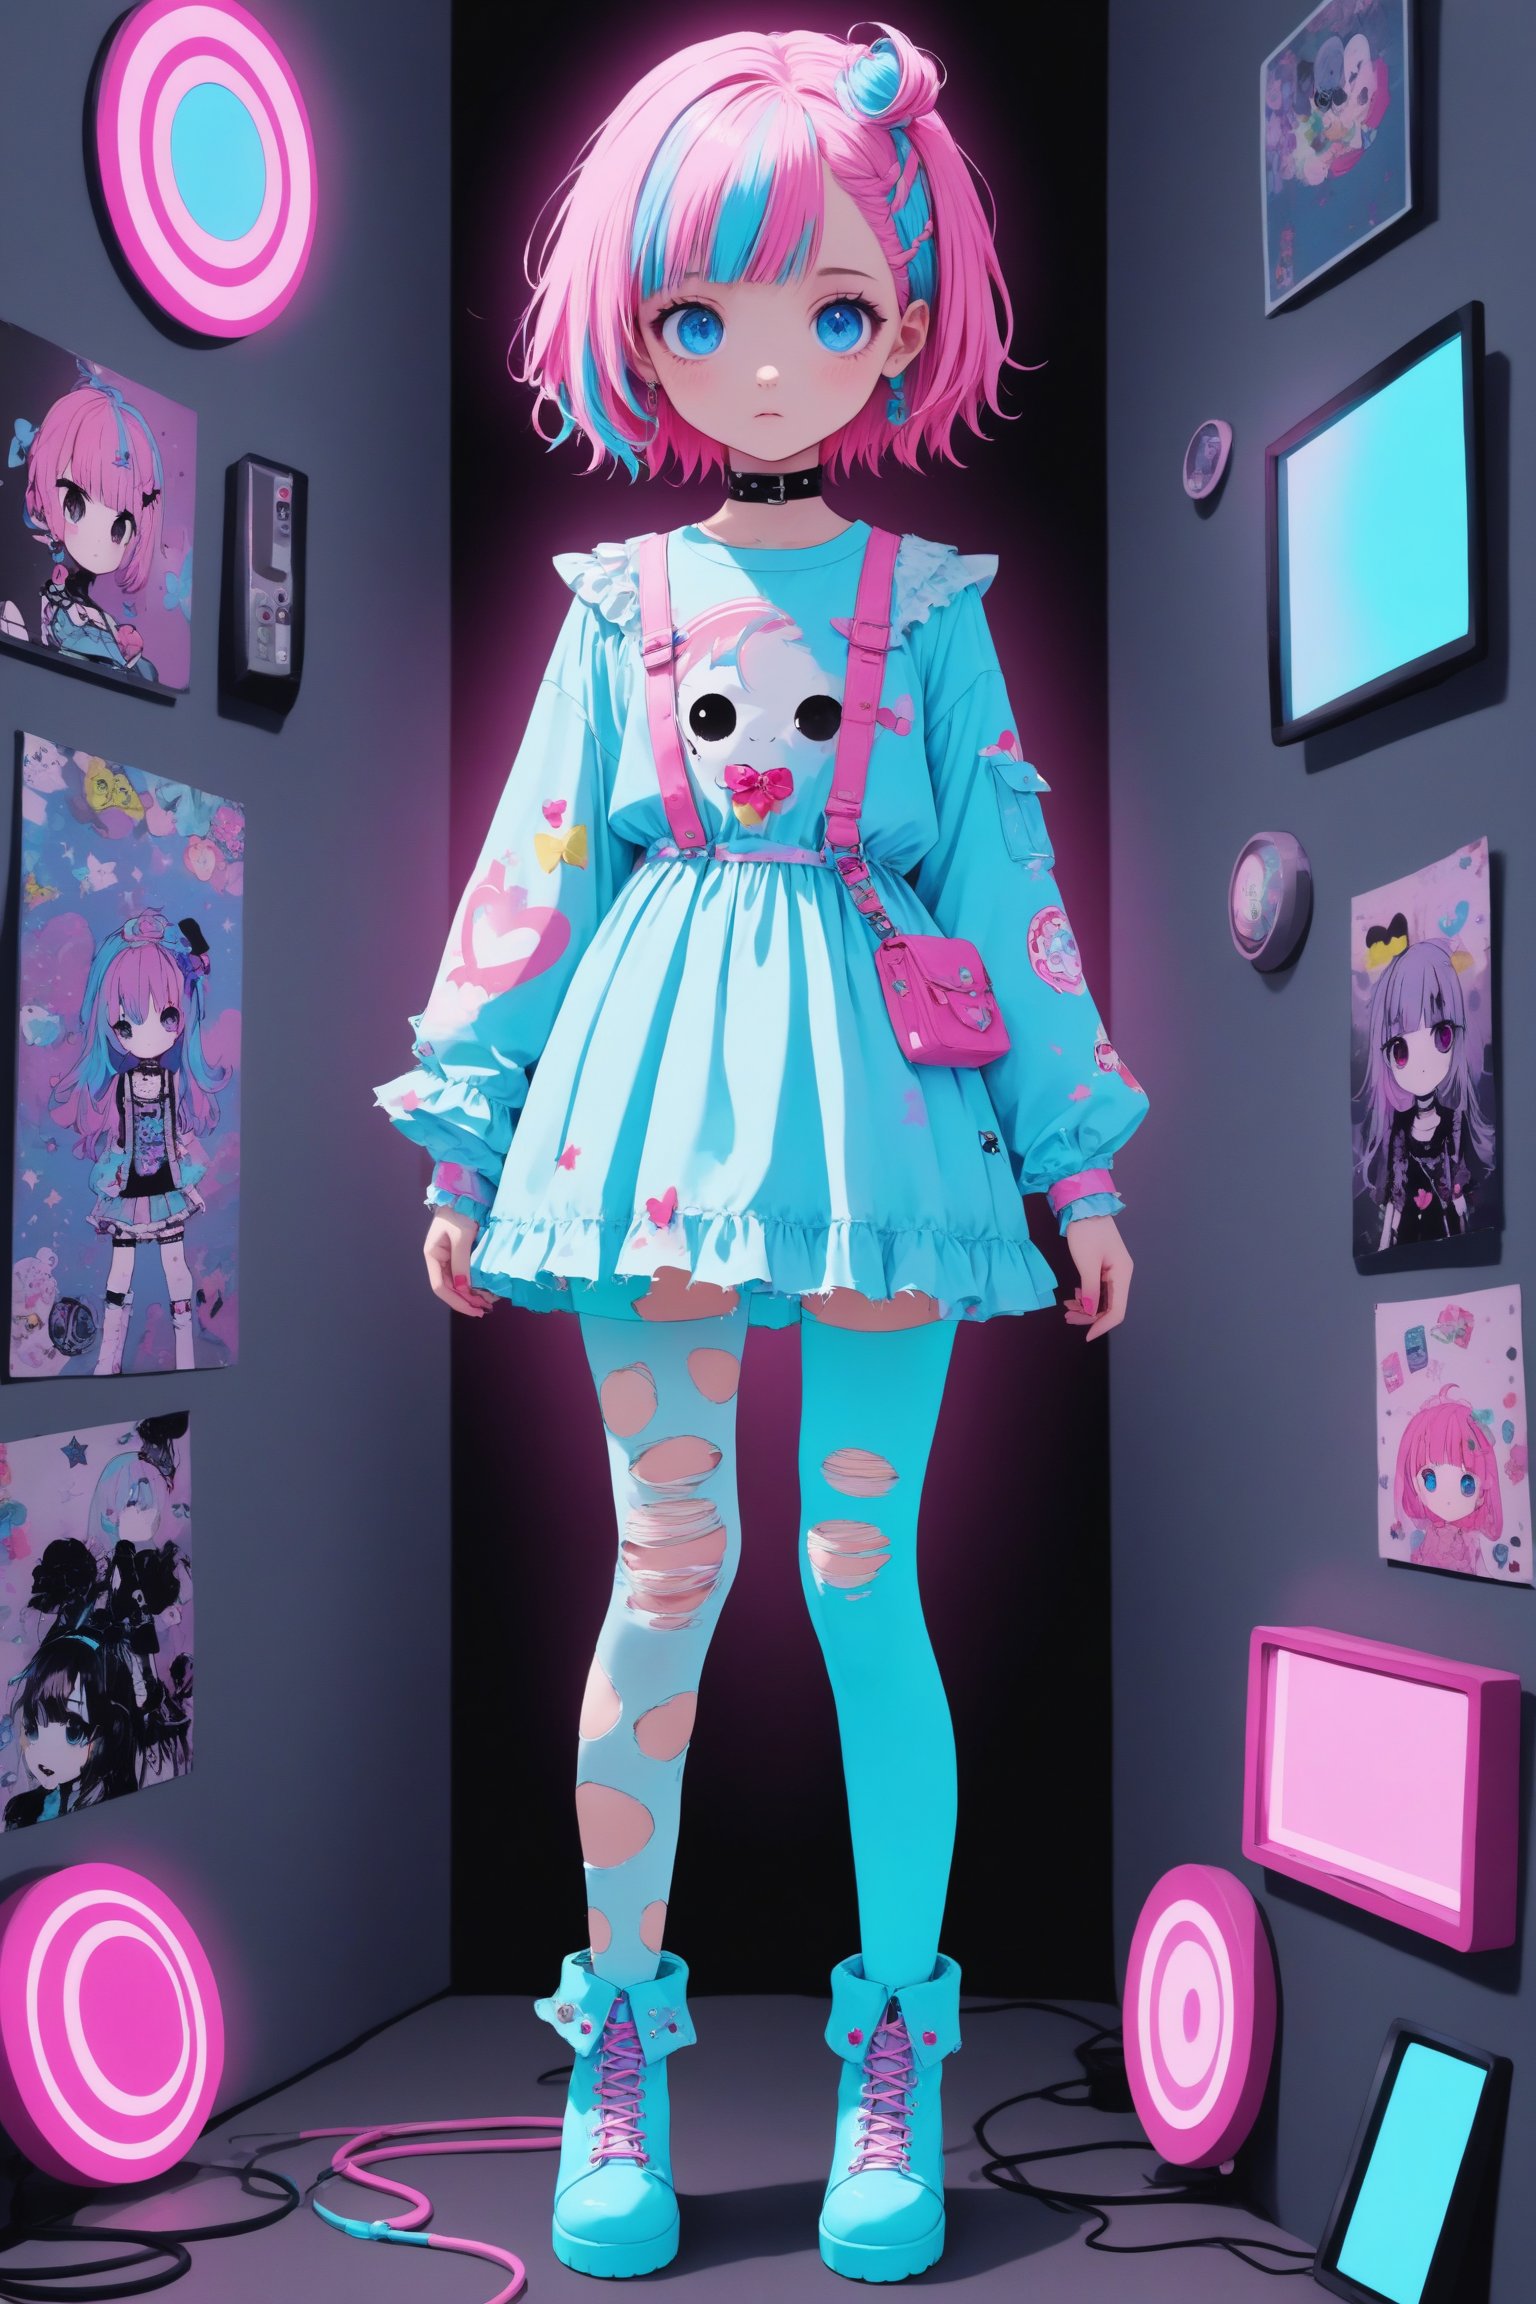 dal-3,vtuber girl,Solo,neon Light bright,(luminous clothing),
cute anime characters
Beautiful blue eyes,asymmetric bangs,candy punk Fashion,Pastel colored clothes based on blue and pink,Pastel Emo Fashion,kawaii and Lolita themes,She wears a distressed pastel dress with lace, an oversized torn cardiganAnime Print Shirt,Gothic Style tights, long military boots,,dal-6 style,pink-emo,emo,Visual_Illustration,c0l0urc0r3,neon photography style,Anime girl,glowing,Deformed